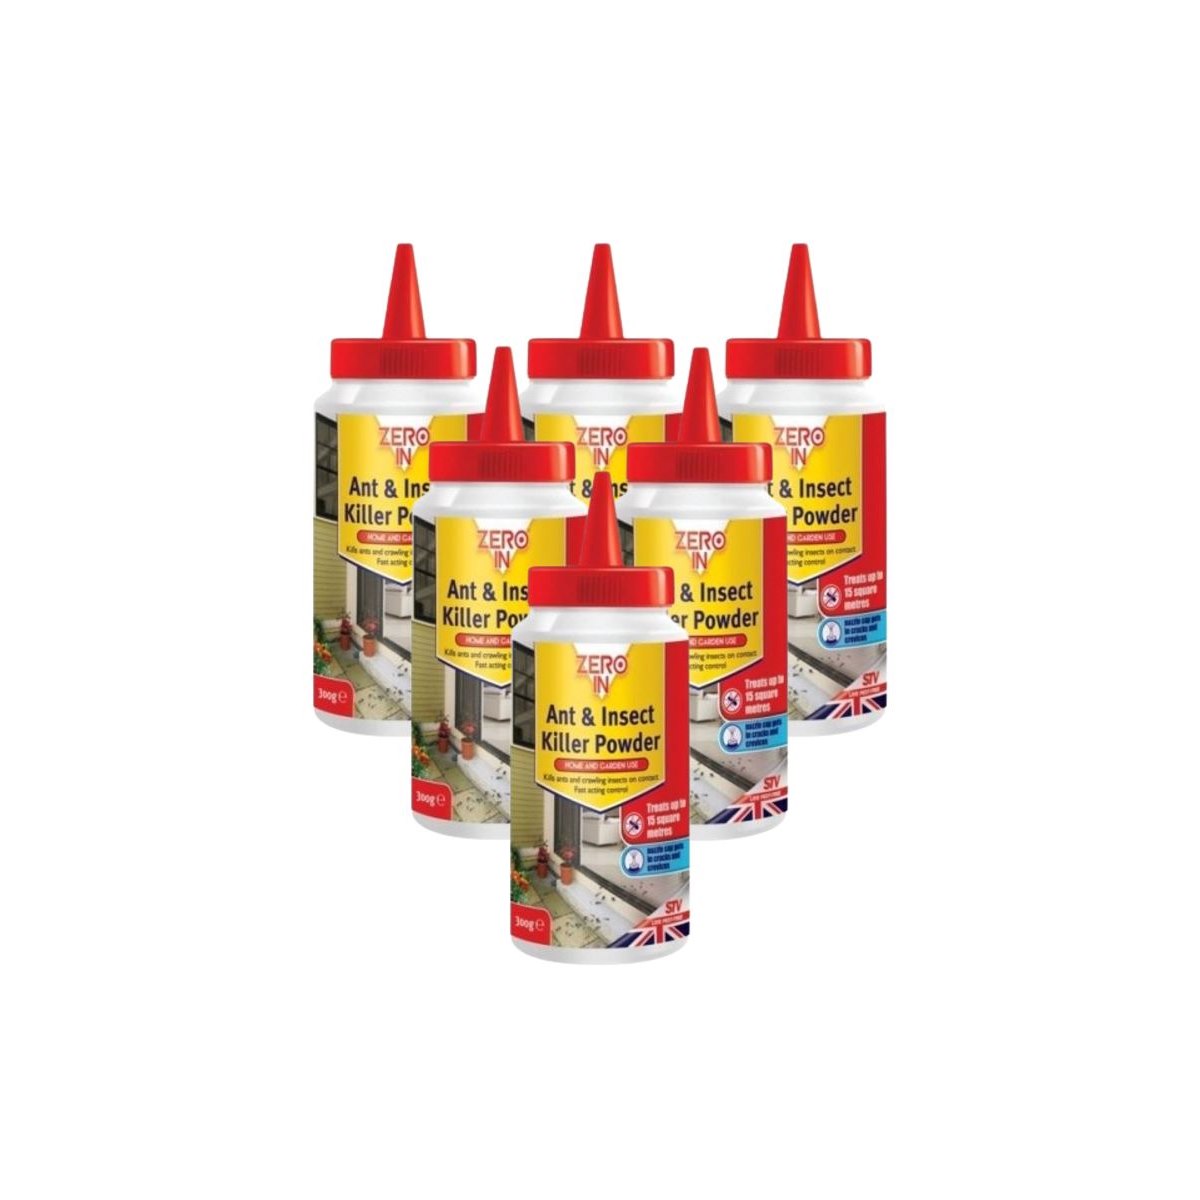 Case of 6 x Zero In Ant and Insect Killer Powder 300g